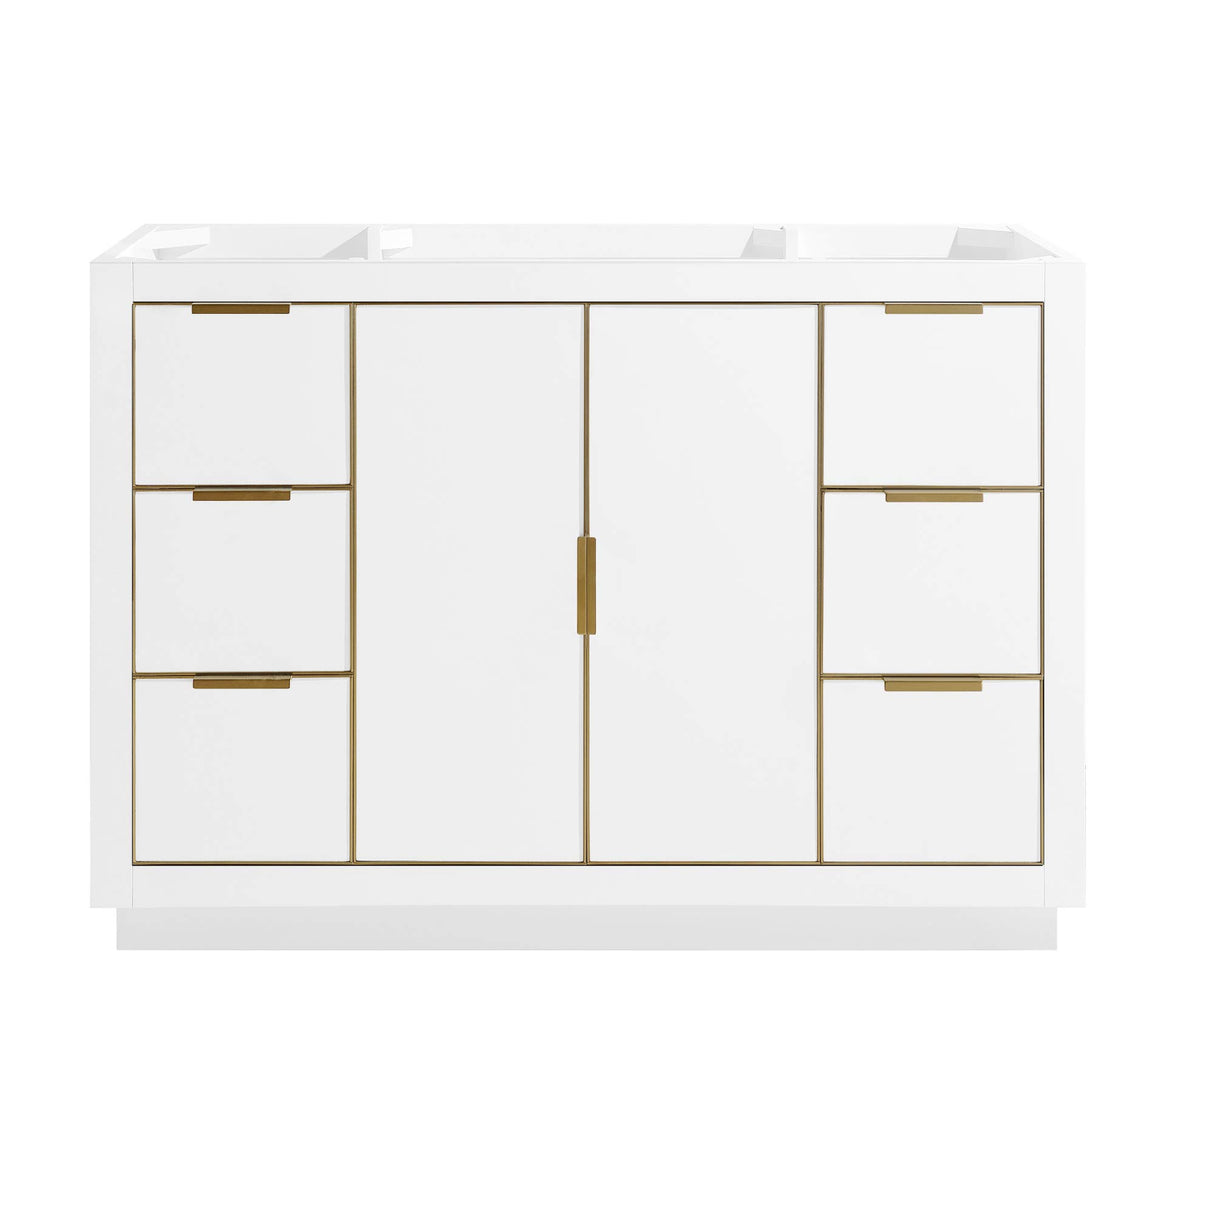 Avanity Austen 48 in. Vanity Only in White with Gold Trim